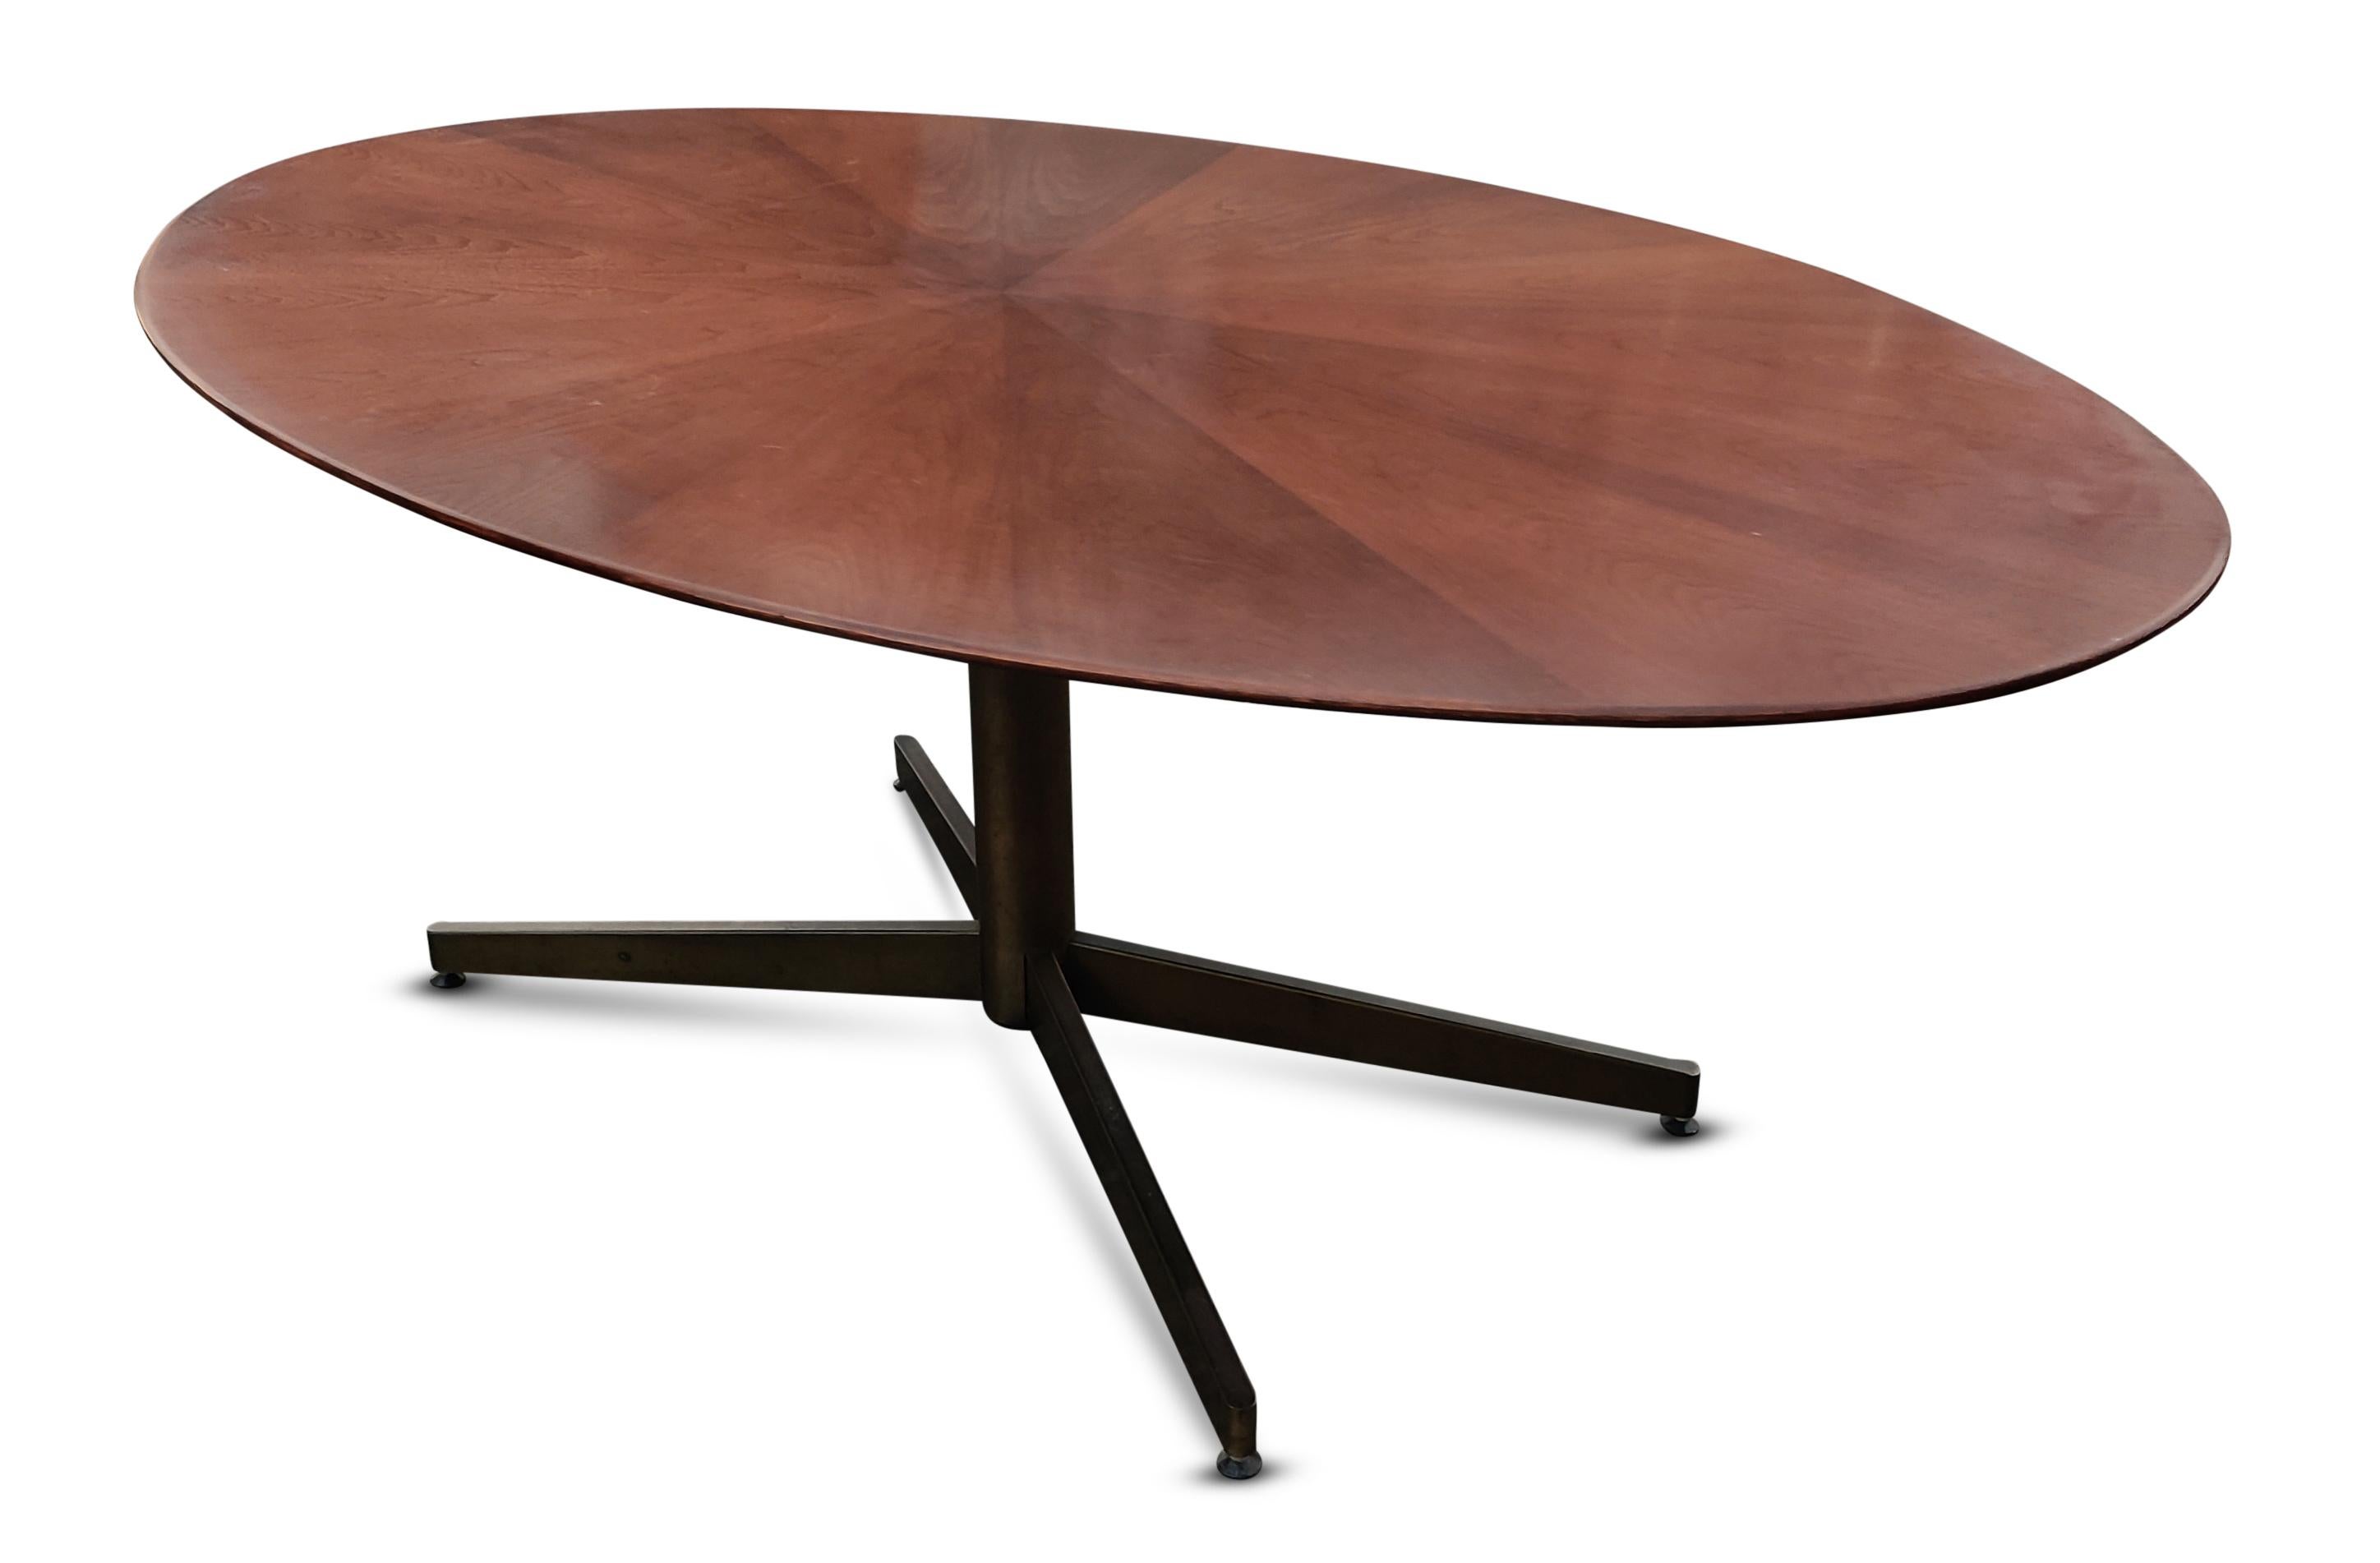 This gorgeous midcentury table is incredibly practical. Because of its dimensions and purposeful design, it can serve as a dining table, a conference table, or as a majestic desk. The oval top, which is 1, 1/4 inch thick, has many alluring design